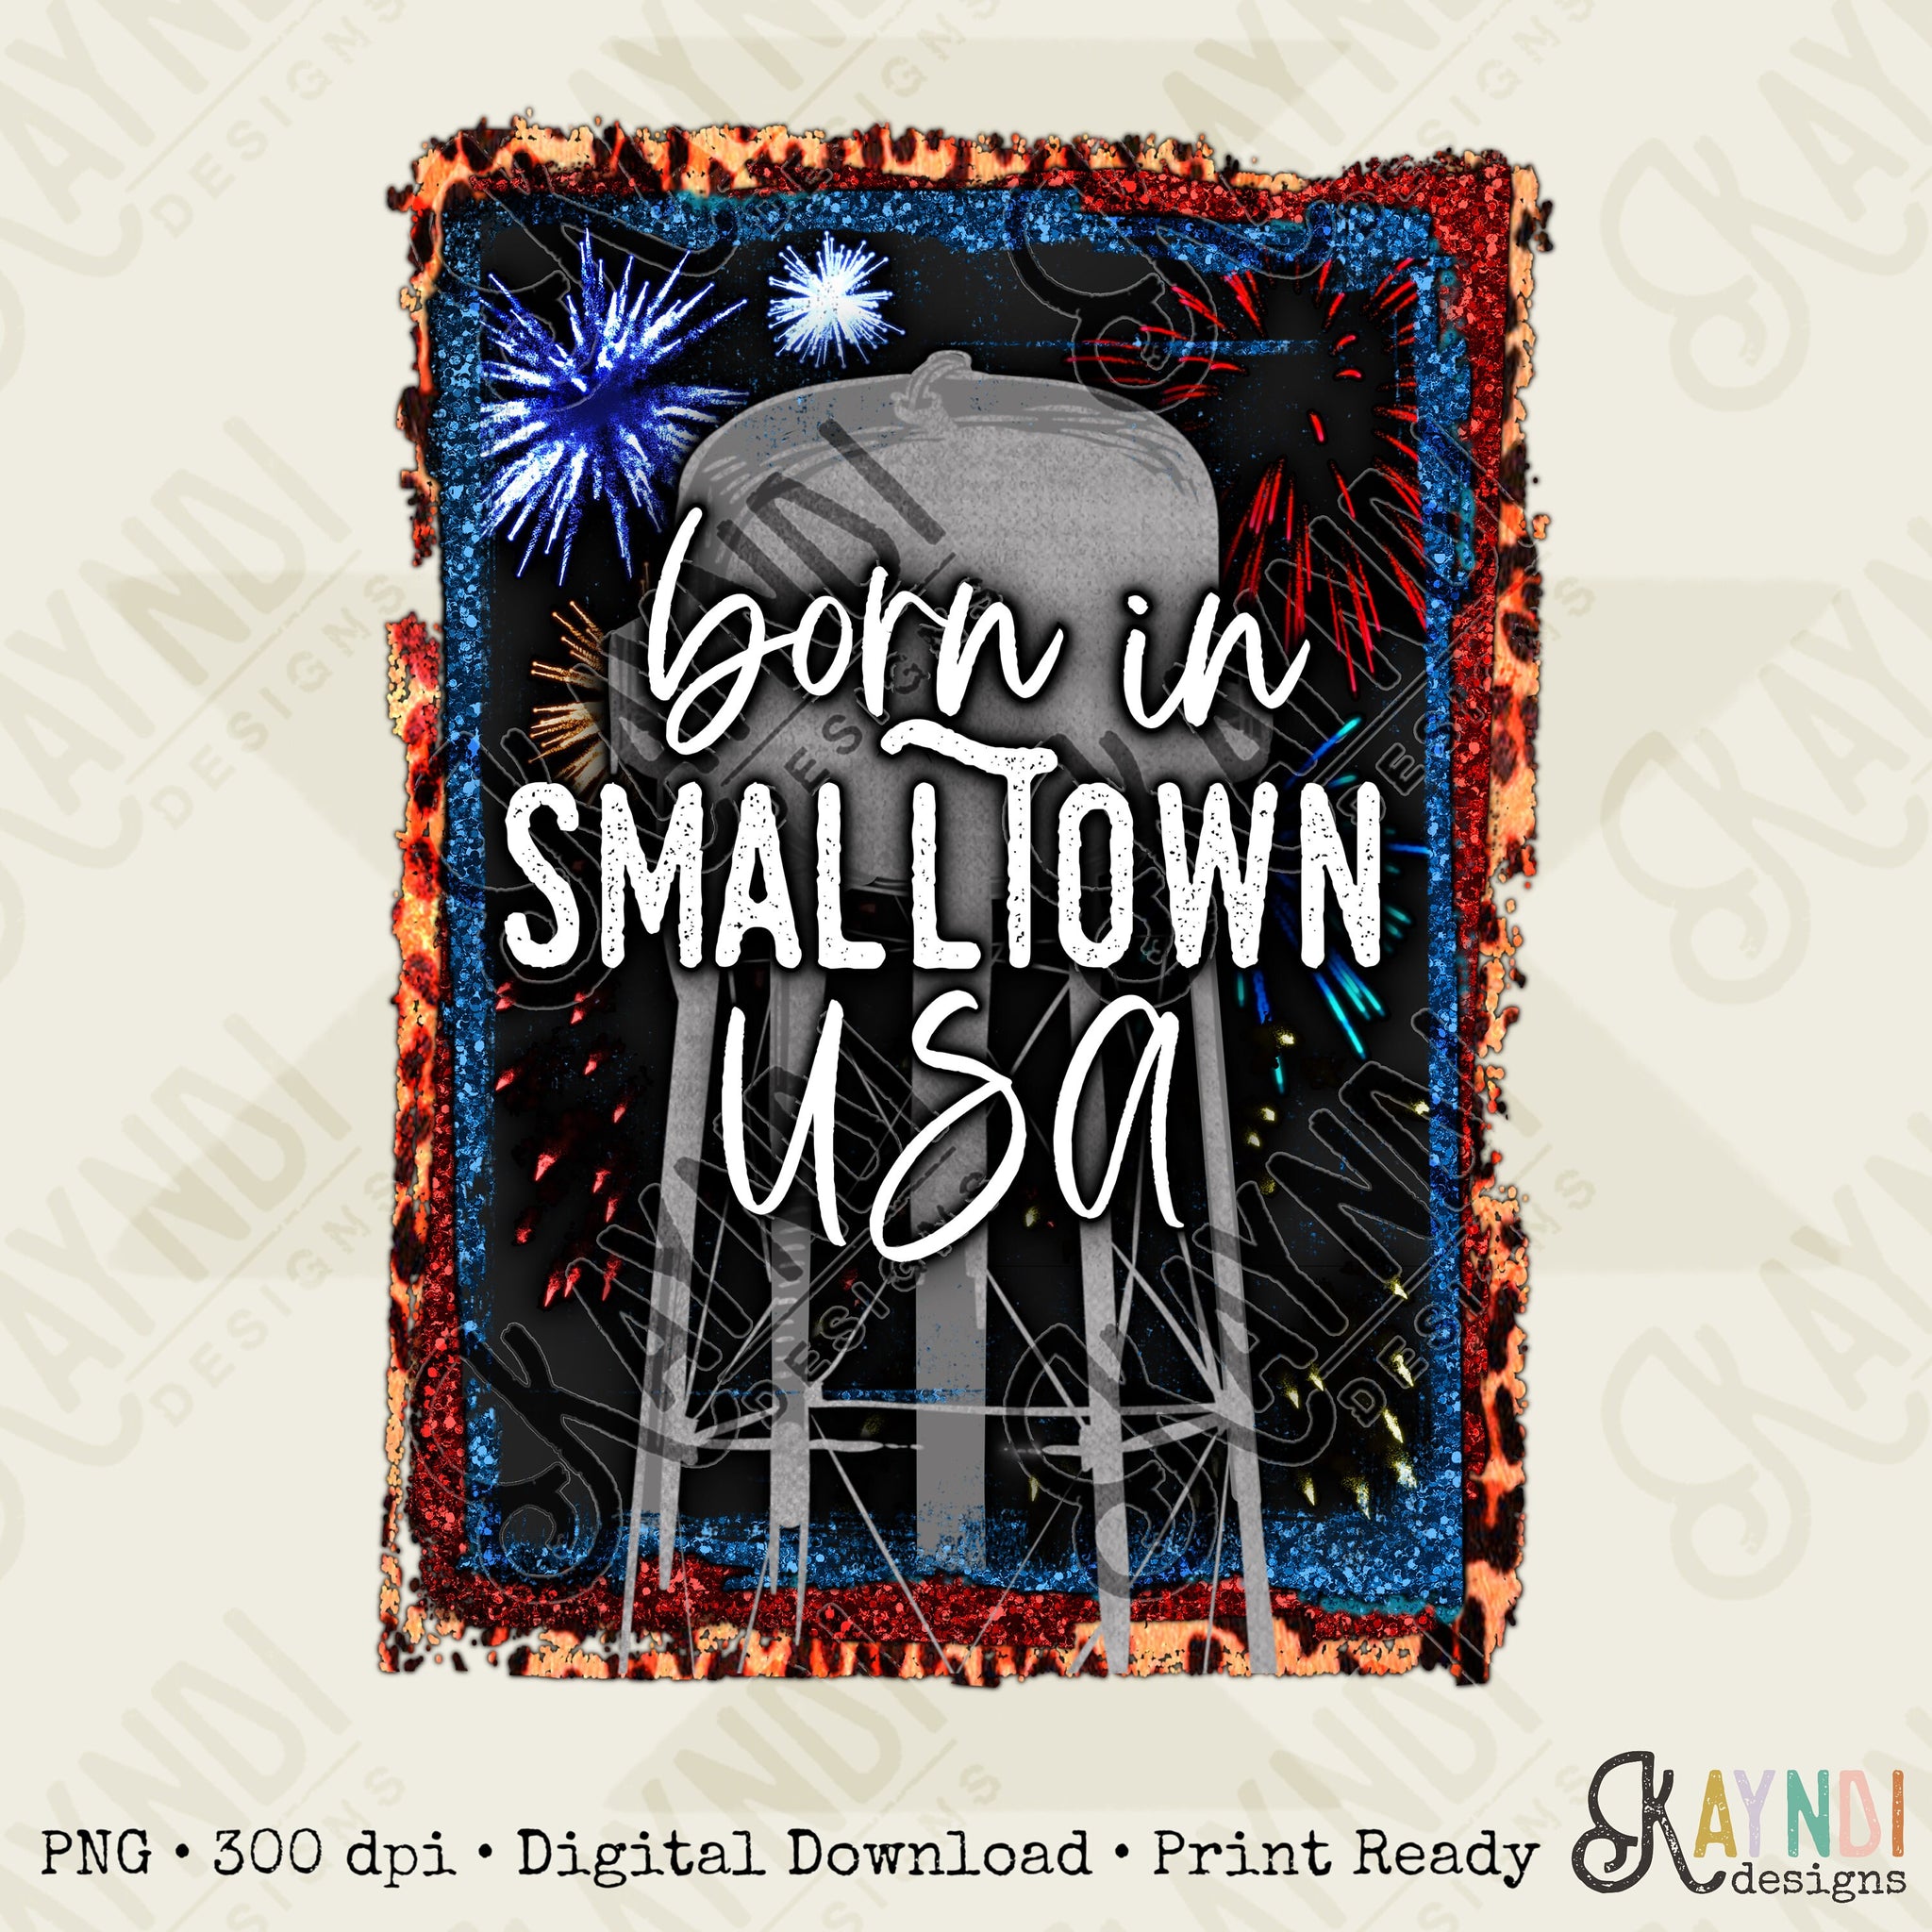 Born in Small Town USA Sublimation Design PNG Digital Download Printable Water Tower Firework America 4th of July Independence Day Patriotic